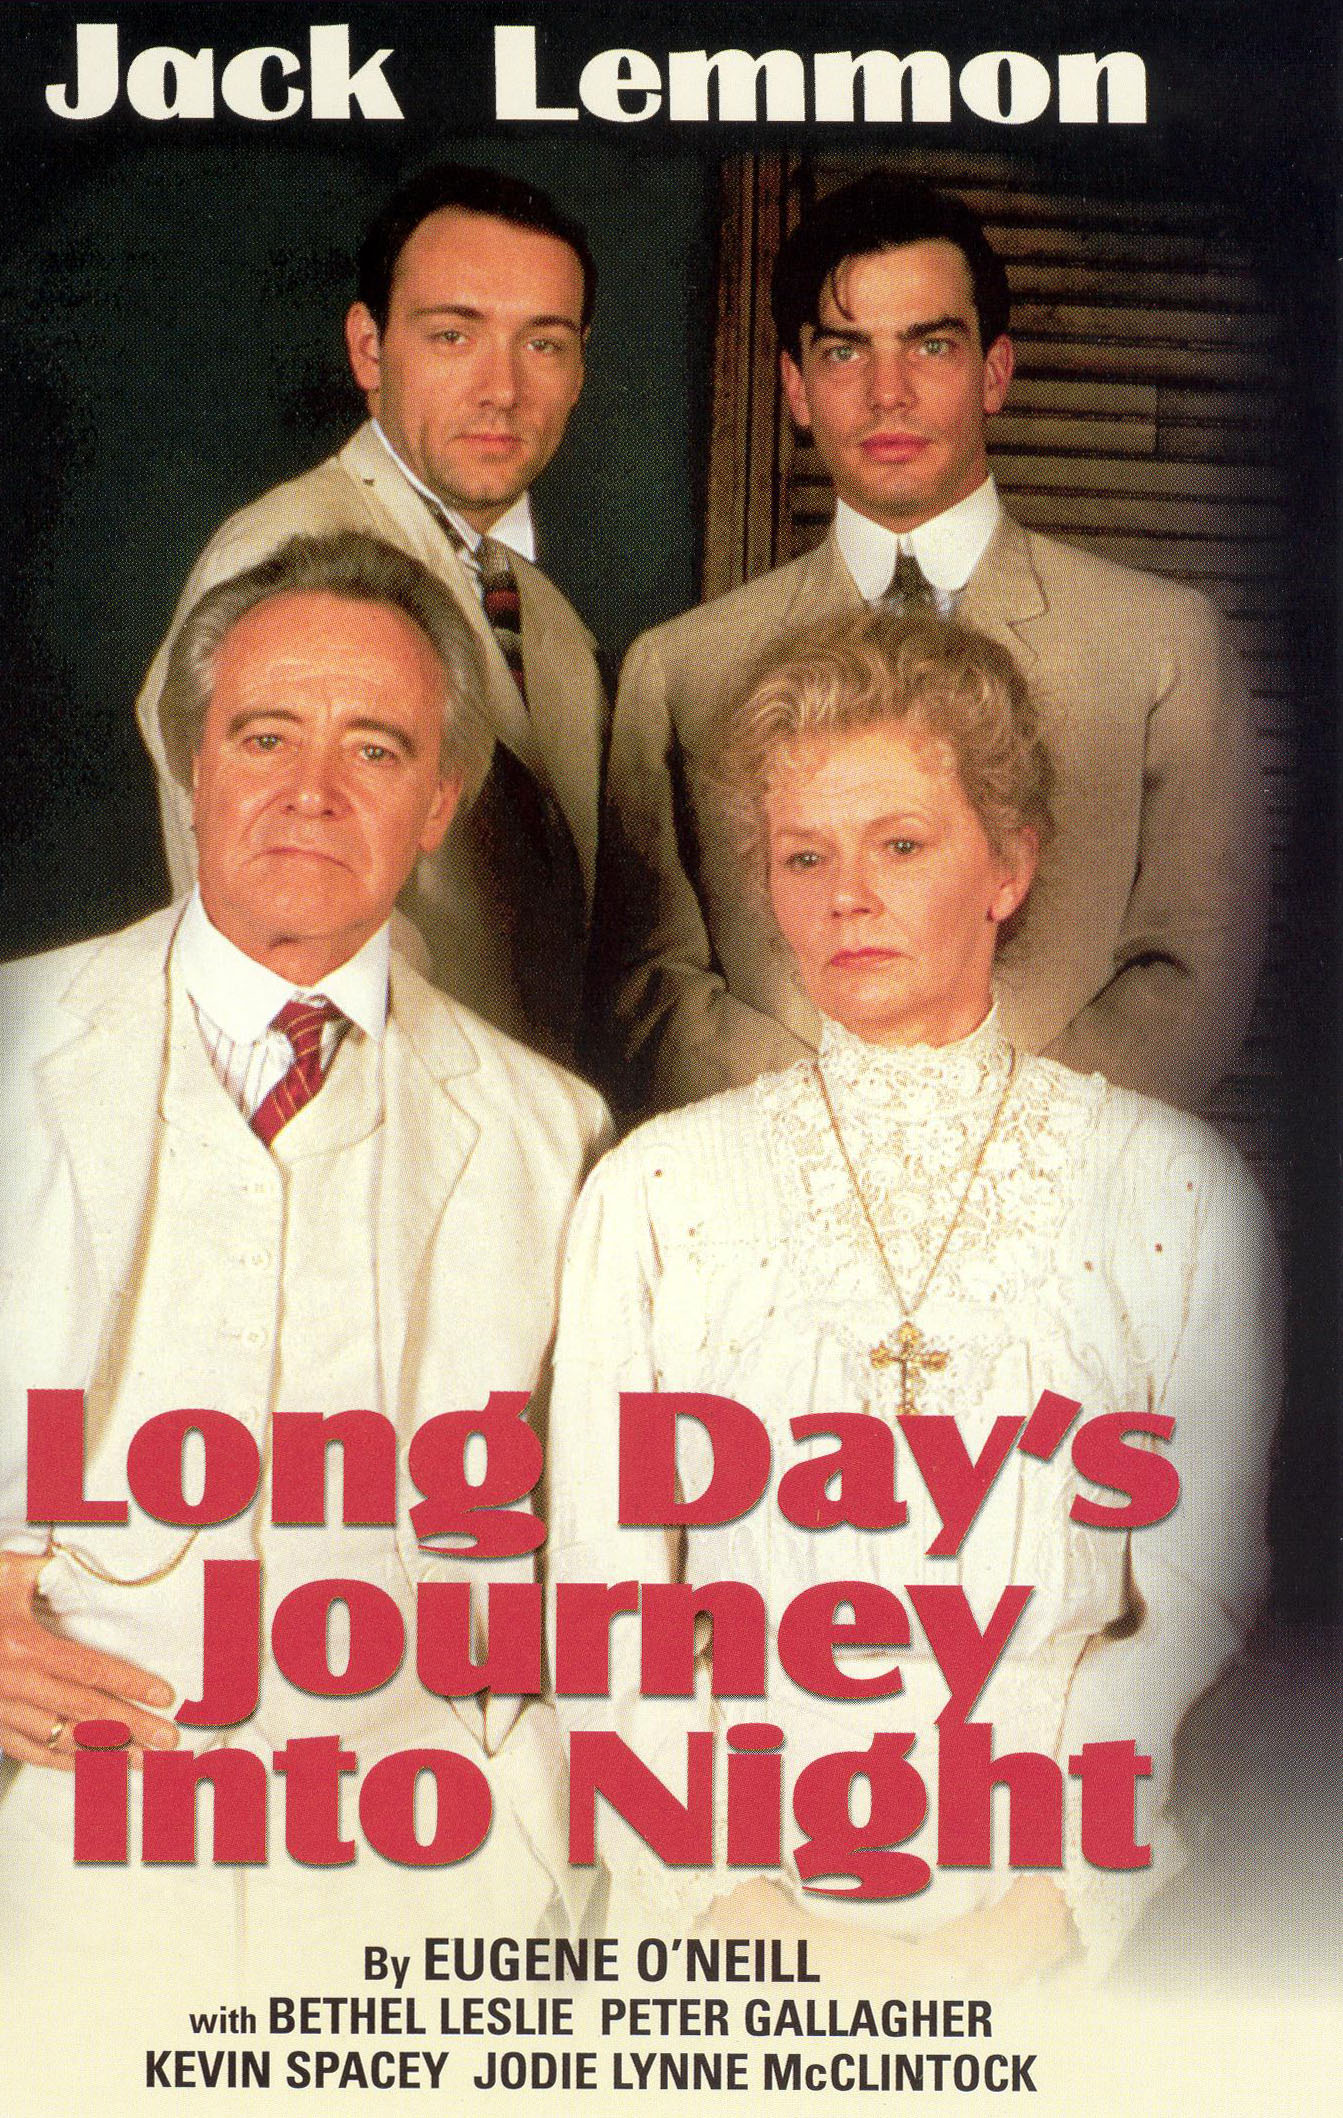 Long Day's Journey into Night (1987) Jonathan Miller Synopsis